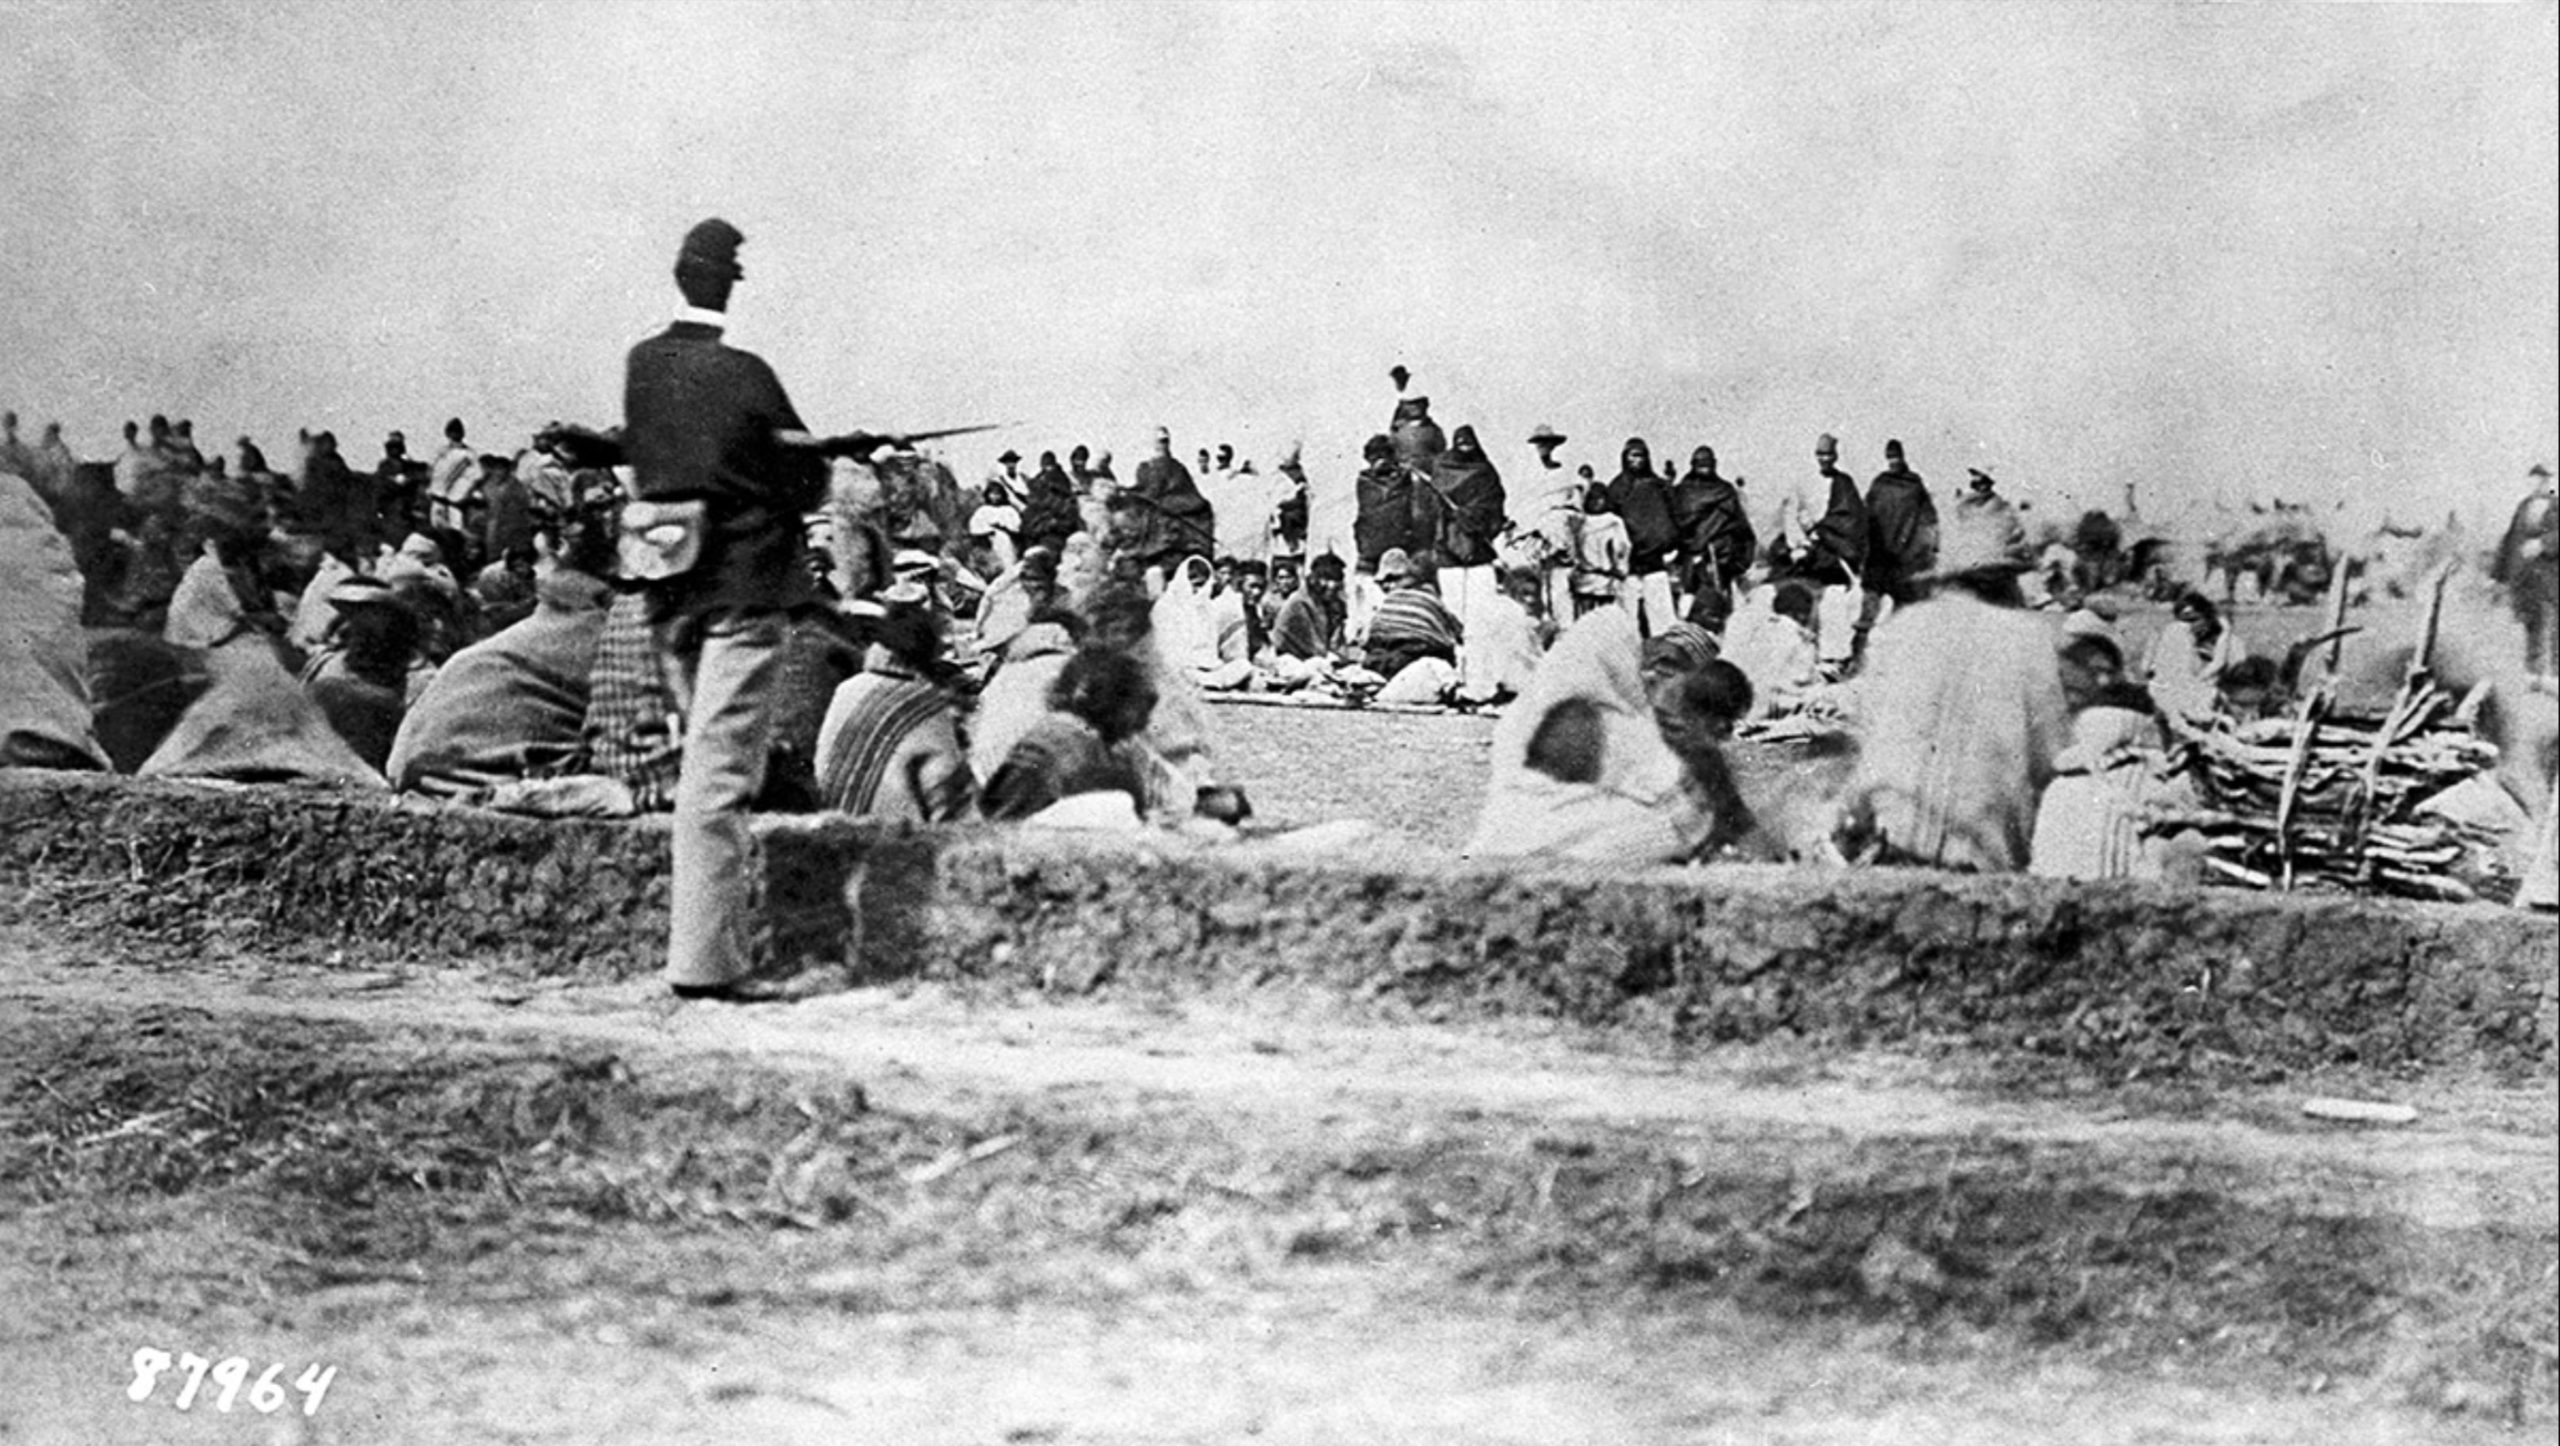 Diné (Navajo) captives under guard, Fort Sumner, New Mexico, c. 1864–68 (New Mexico History Museum, photo: United States Army Signal Corps)